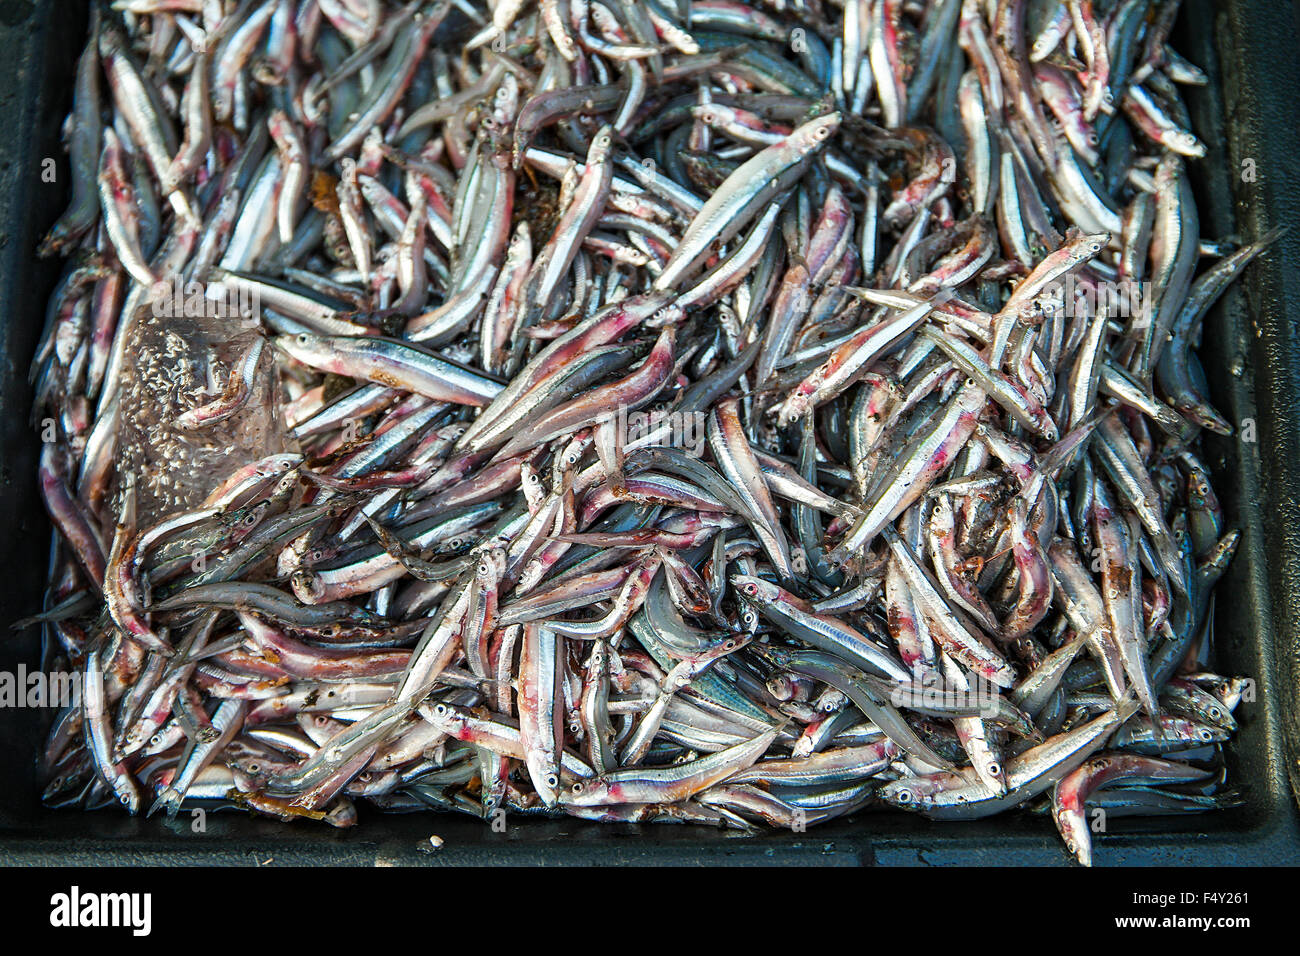 Fresh  anchovies selling at weekend local market.  Selective focus with shallow depth of field. Stock Photo